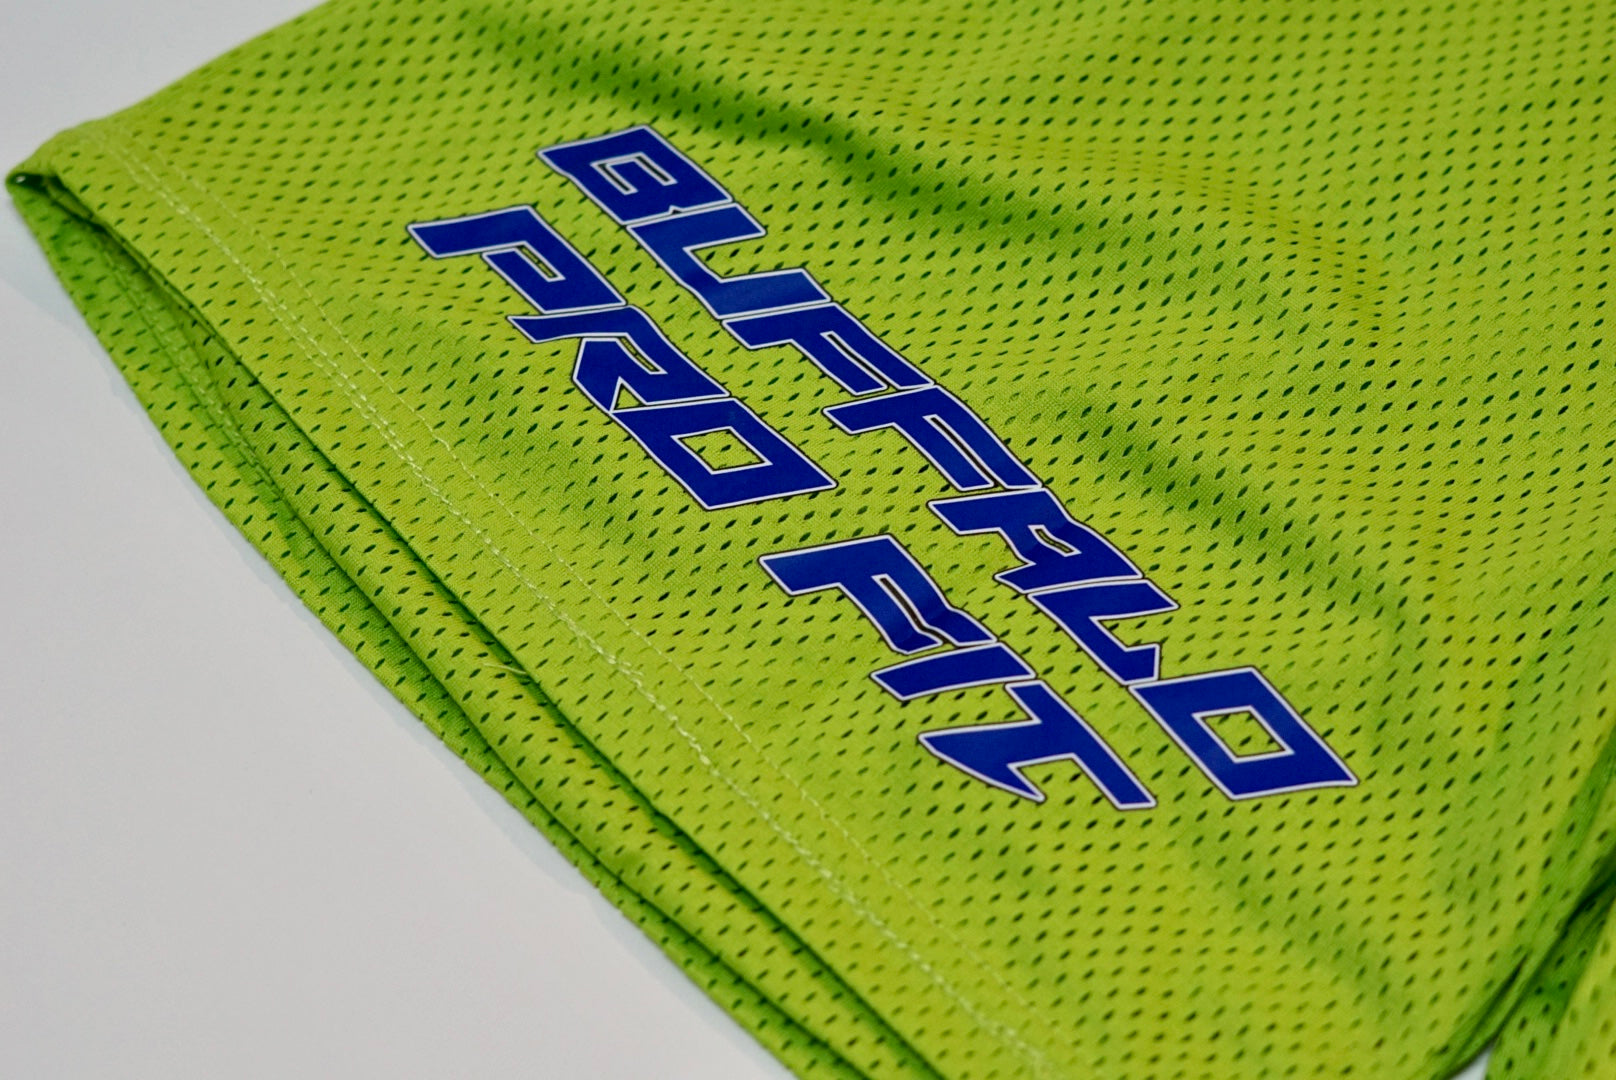 Statement Mesh Shorts Lime Green/Electric Blue